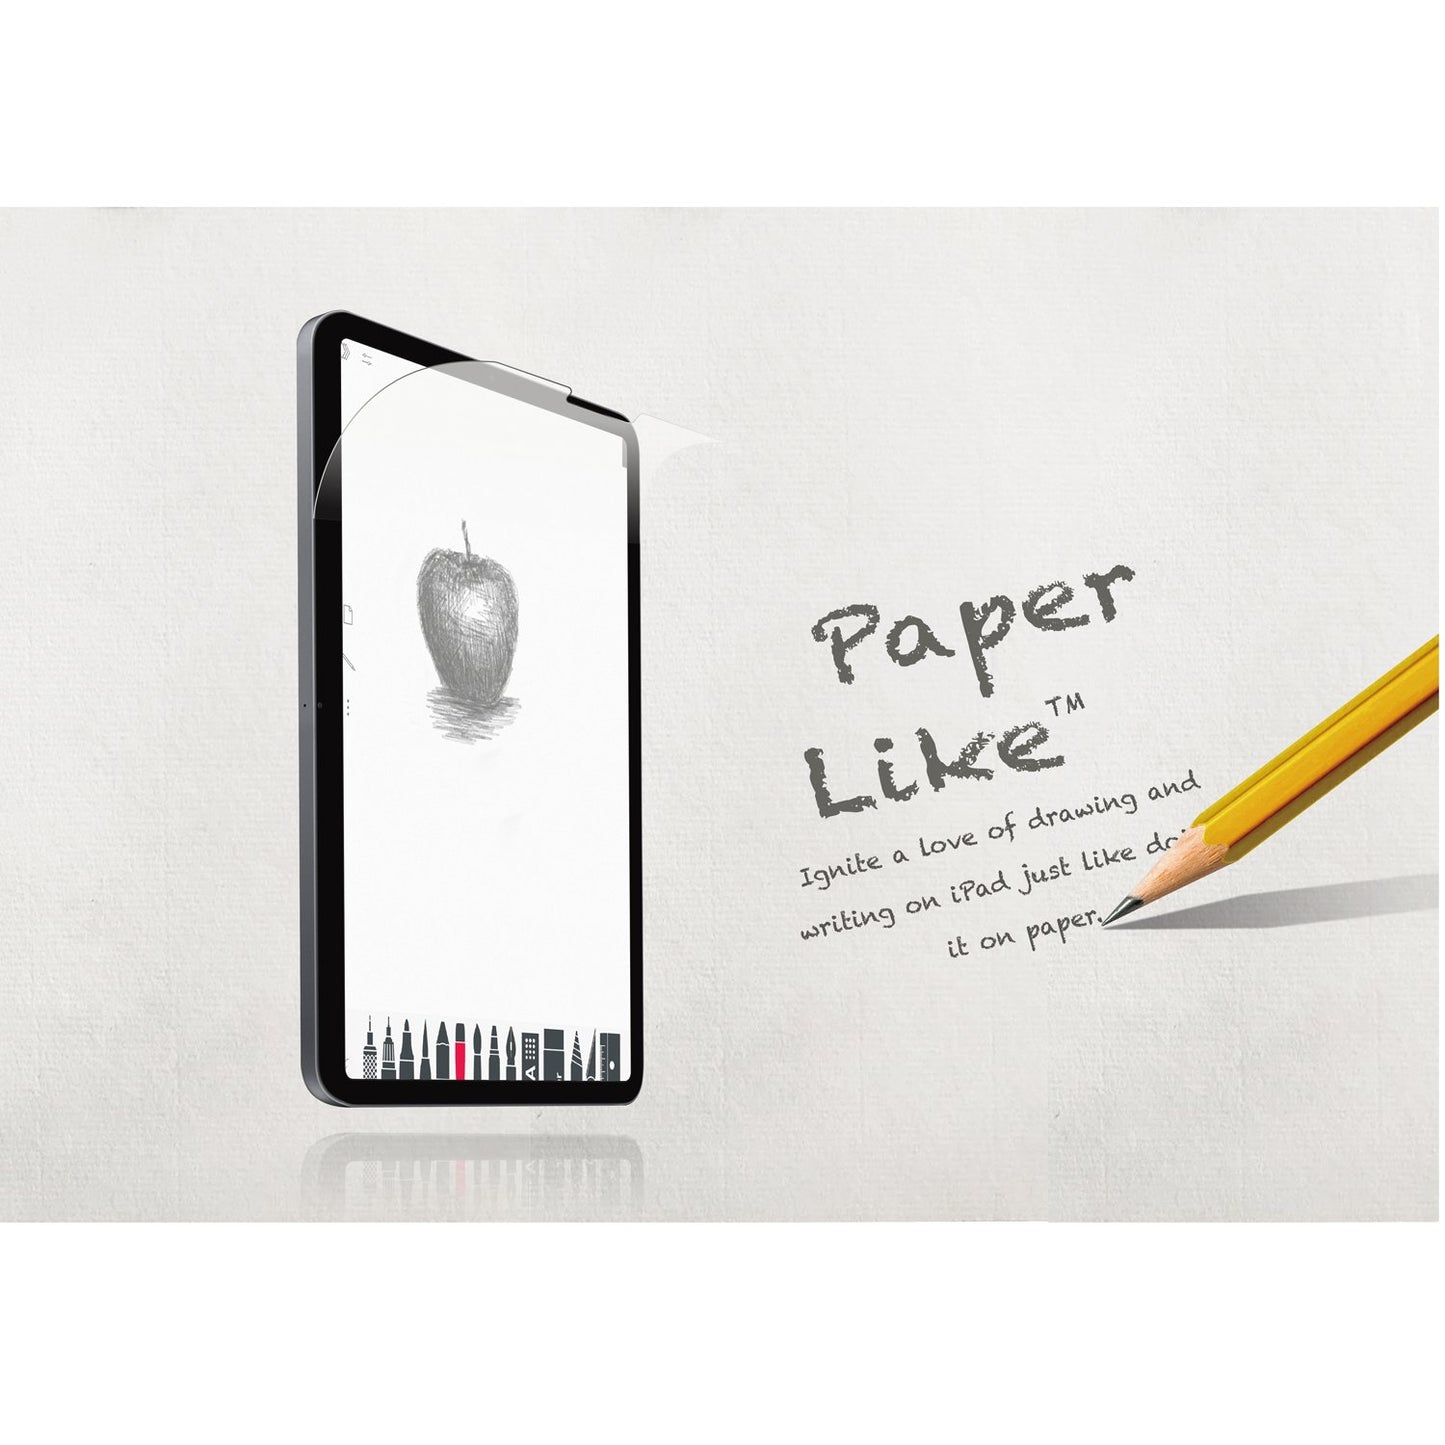 Shop and buy Zeelot Paperlike Film Screen Protector for iPad 10.5" (2017-2019) Anti-Glare Matte| Casefactorie® online with great deals and sales prices with fast and safe shipping. Casefactorie is the largest Singapore official authorised retailer for the largest collection of mobile premium accessories.